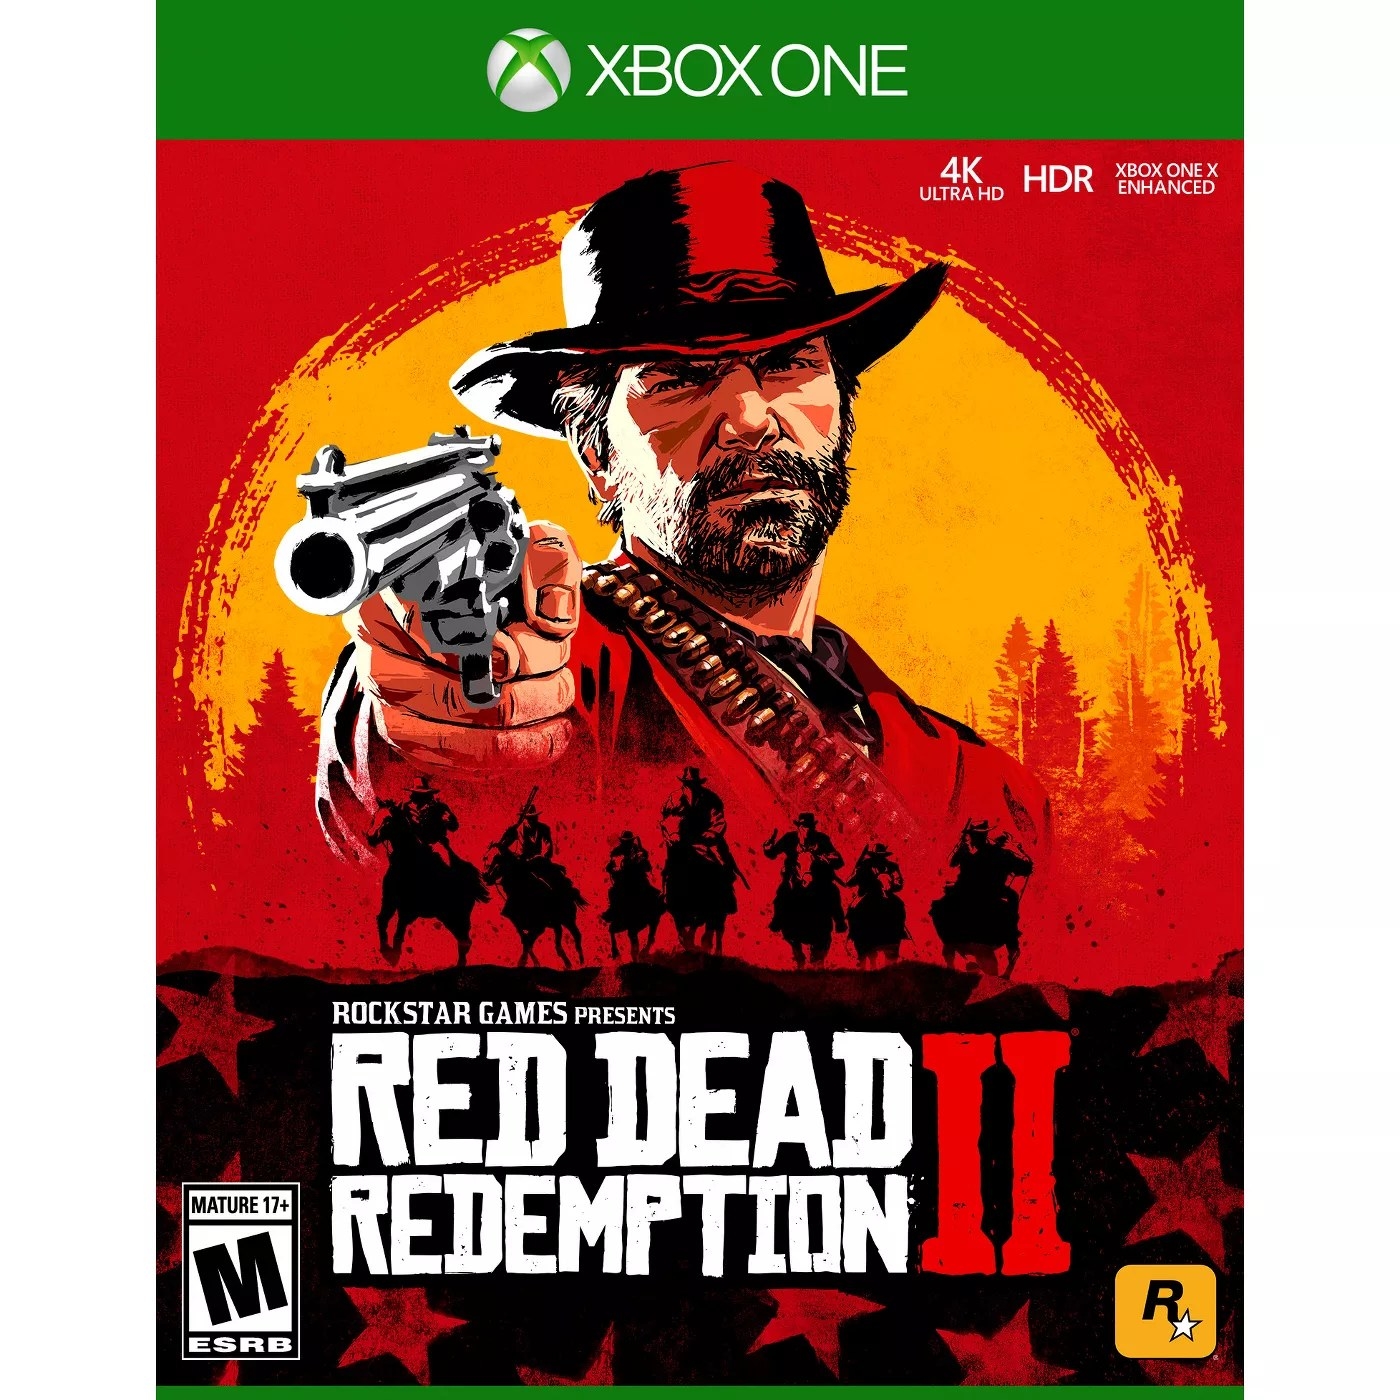 The Red Dead Redemption II video game